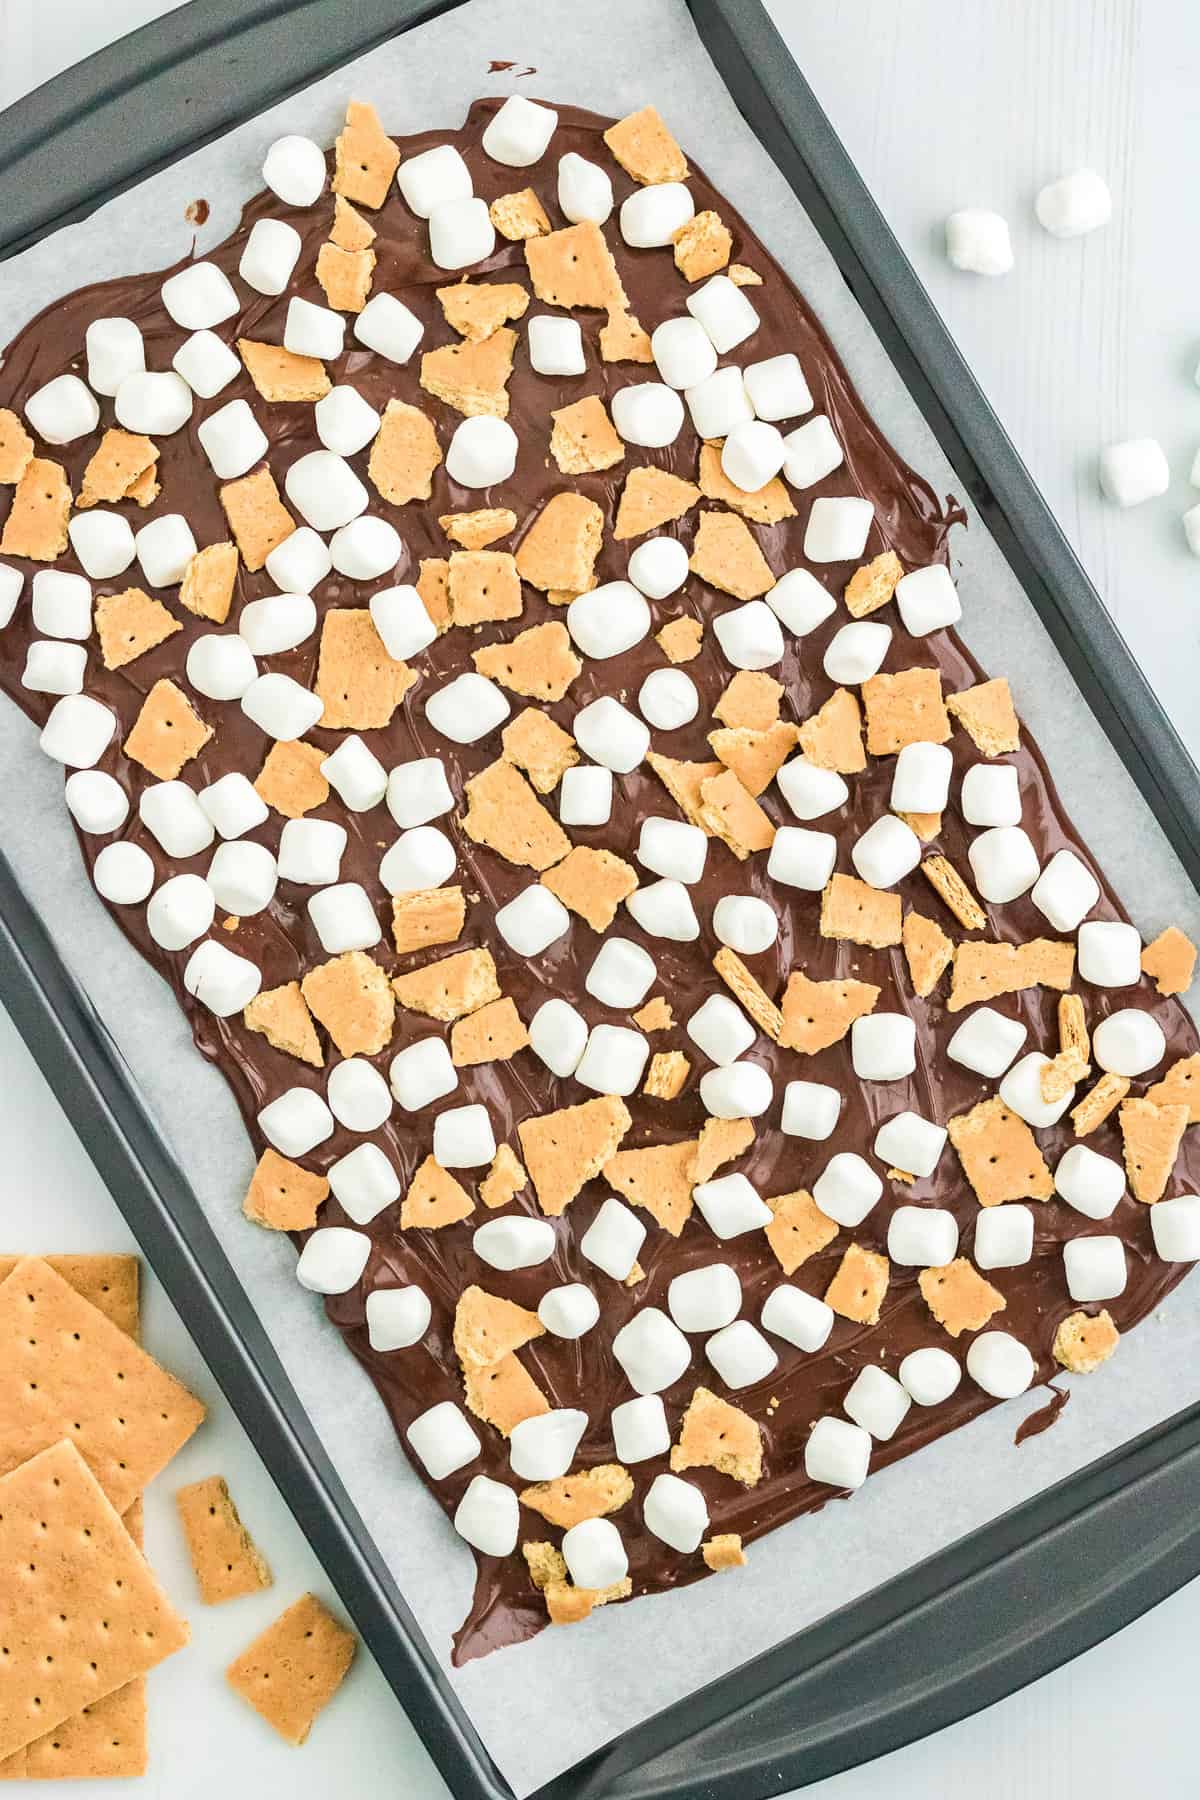 Spread the Chocolate flat on a piece of parchment paper in a cookie sheet & add the broken graham crackers and marshmallows on top.